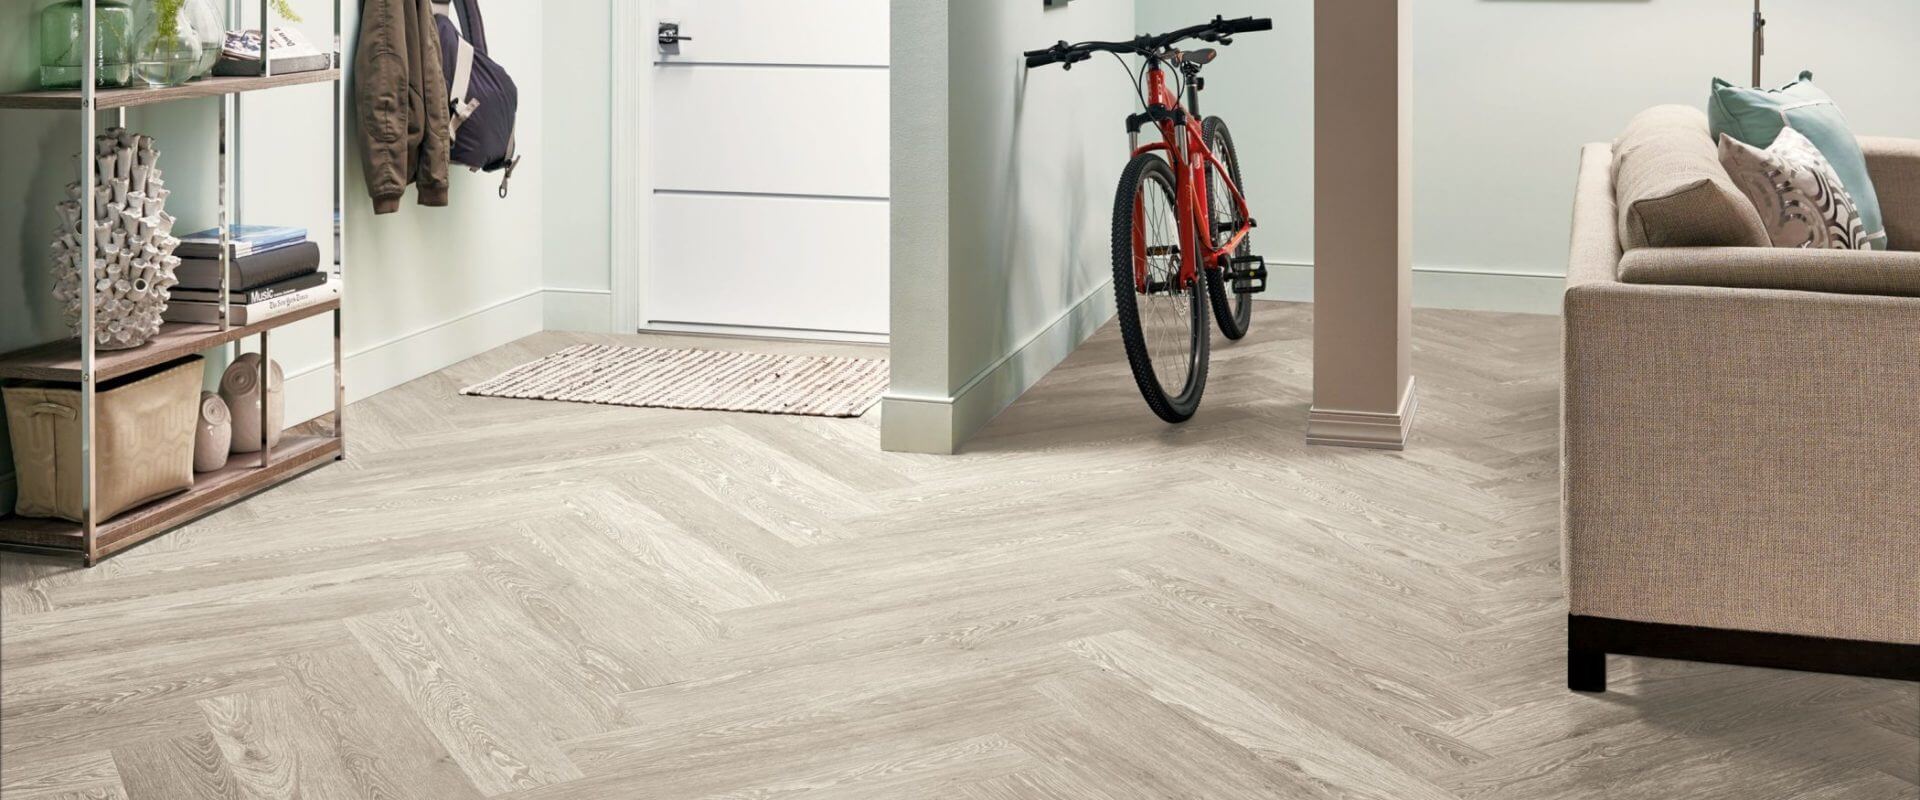 Why Luxury Vinyl / VCT Tile is the Best Flooring for Your Rental Property